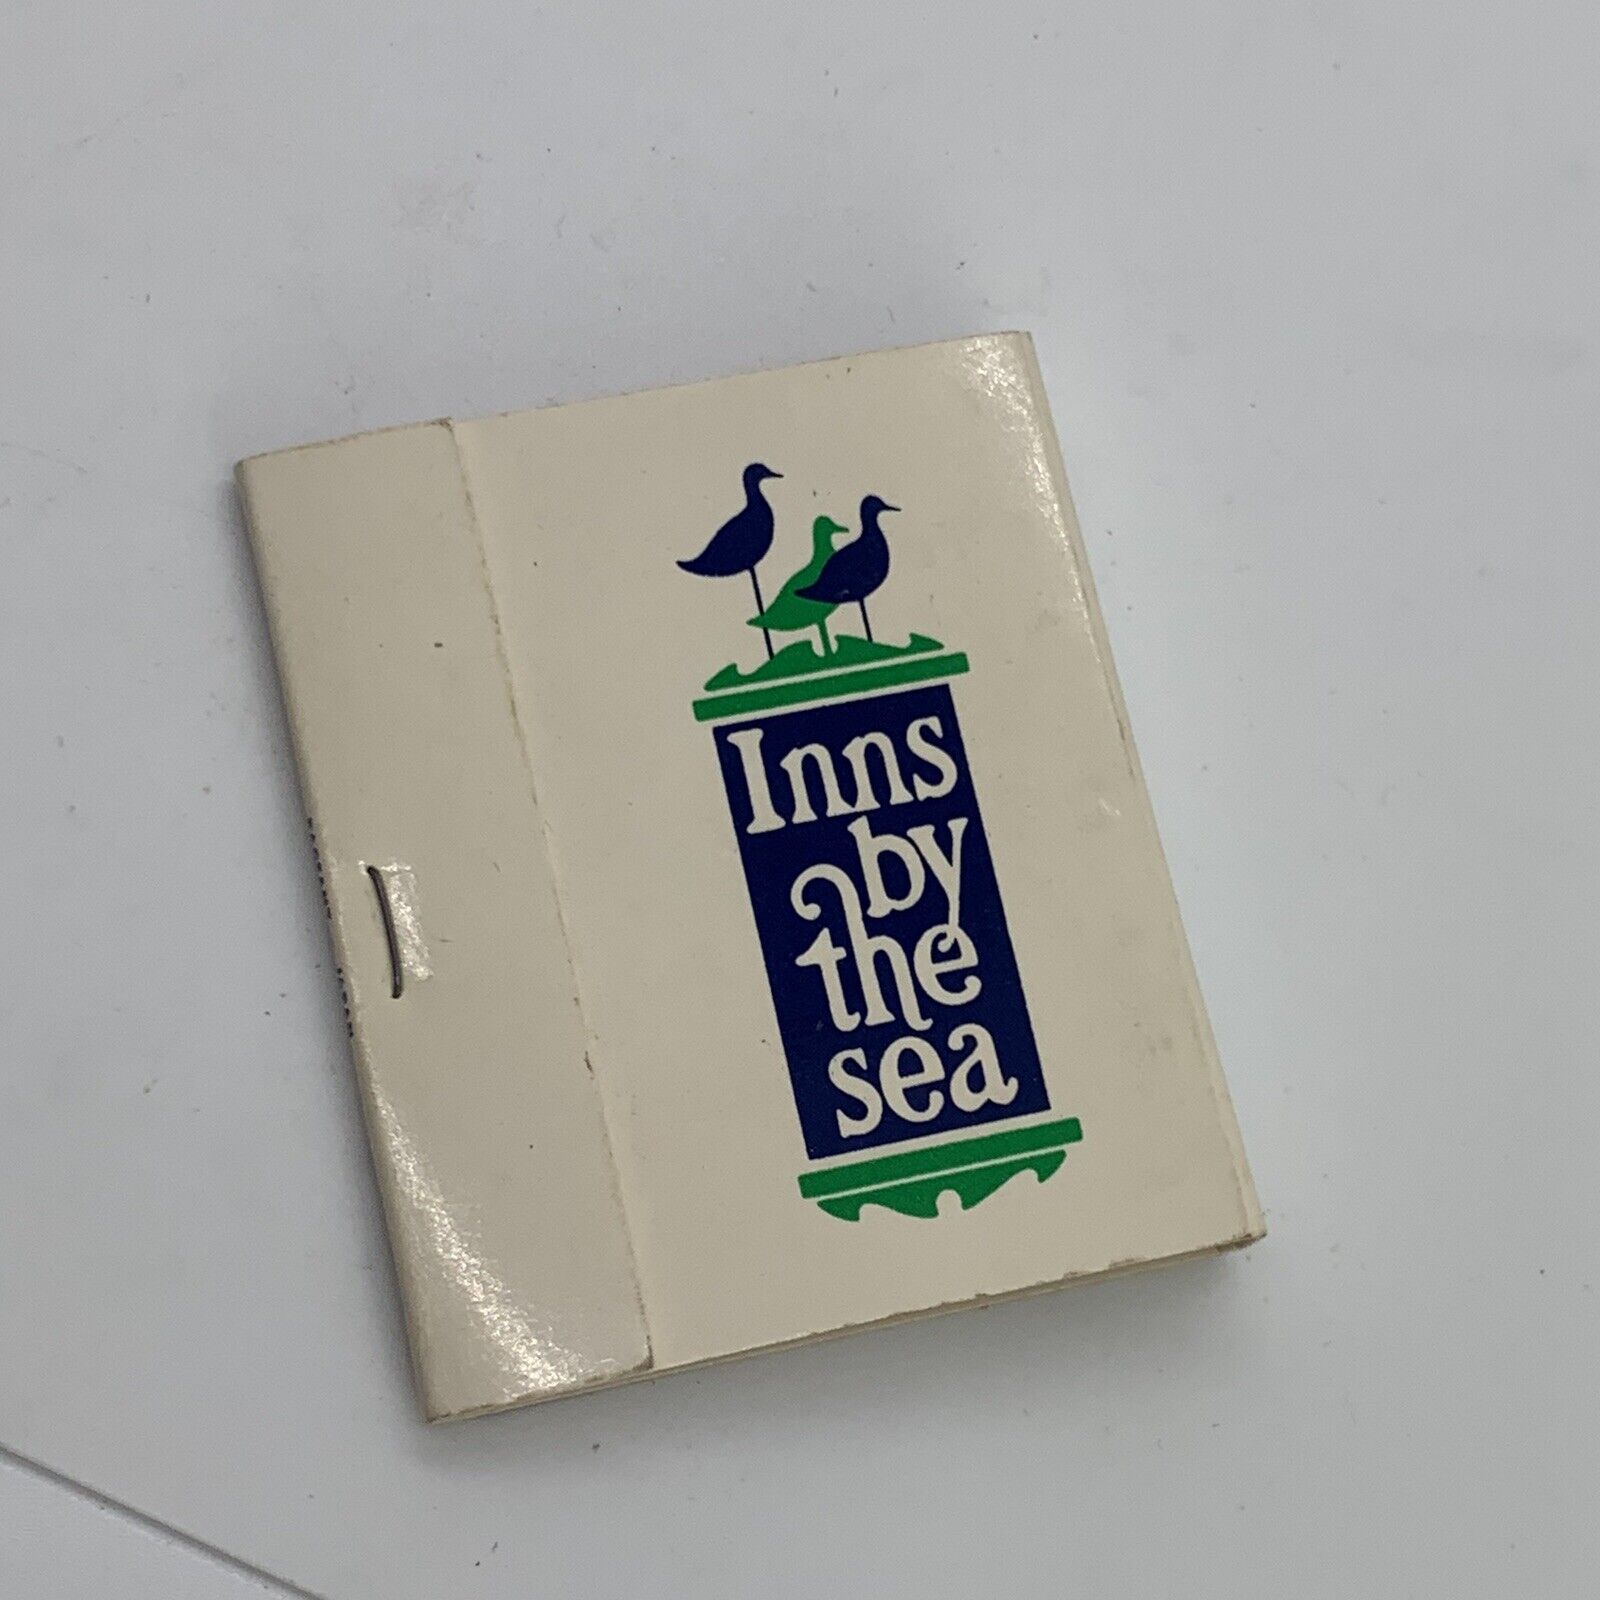 Vintage Inns By The Sea Hotel Motel Matchbook Cover Unstruck